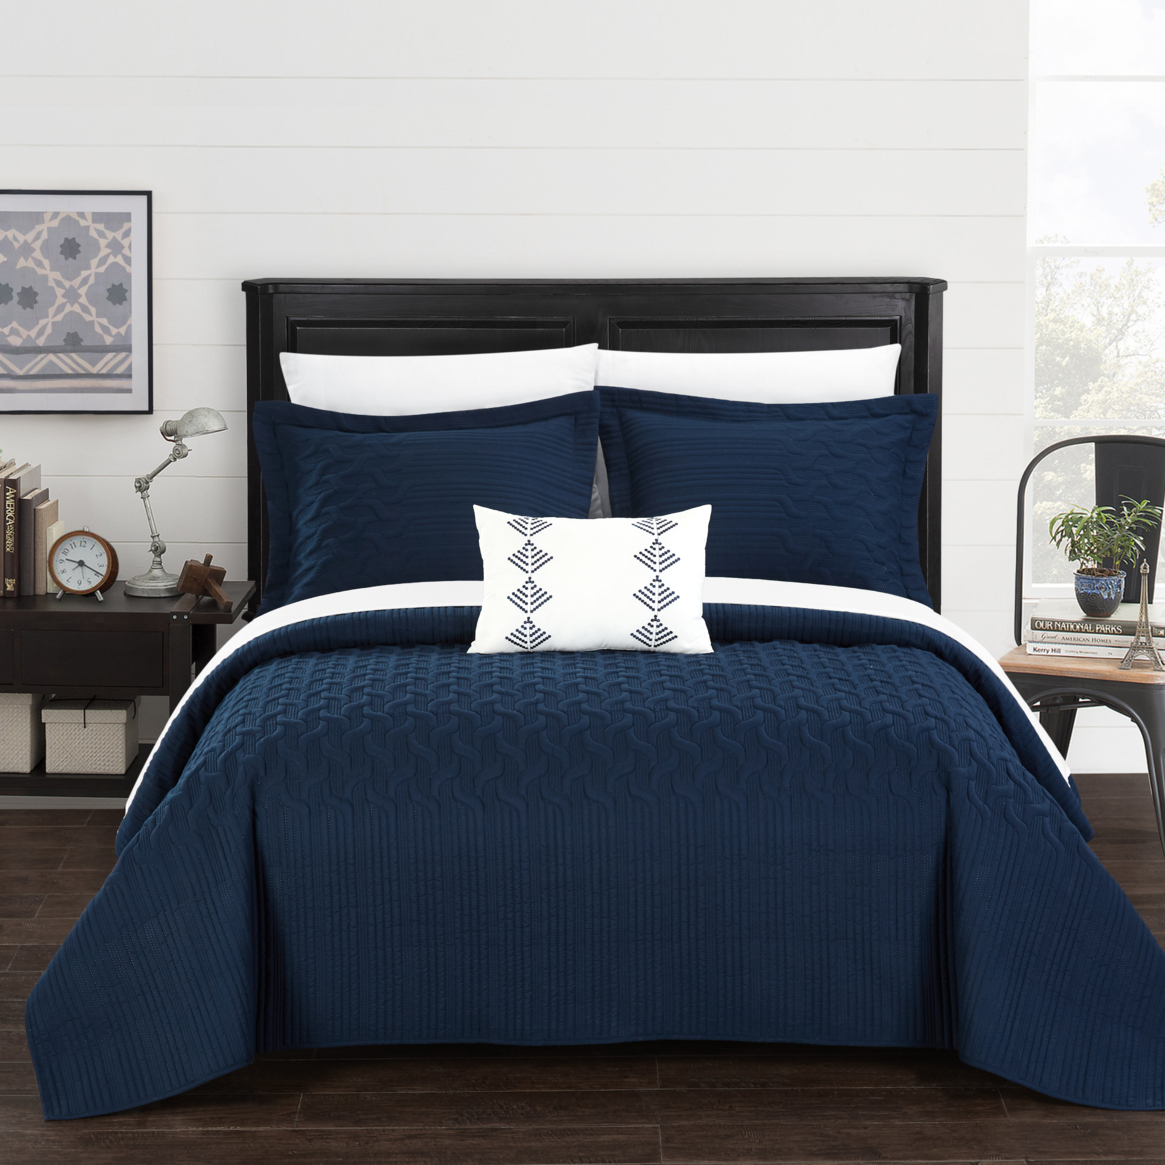 Shaliya 8 Or 6 Piece Quilt Cover Set Interlaced Vine Pattern Quilted Bed In A Bag - Navy, Twin X-long